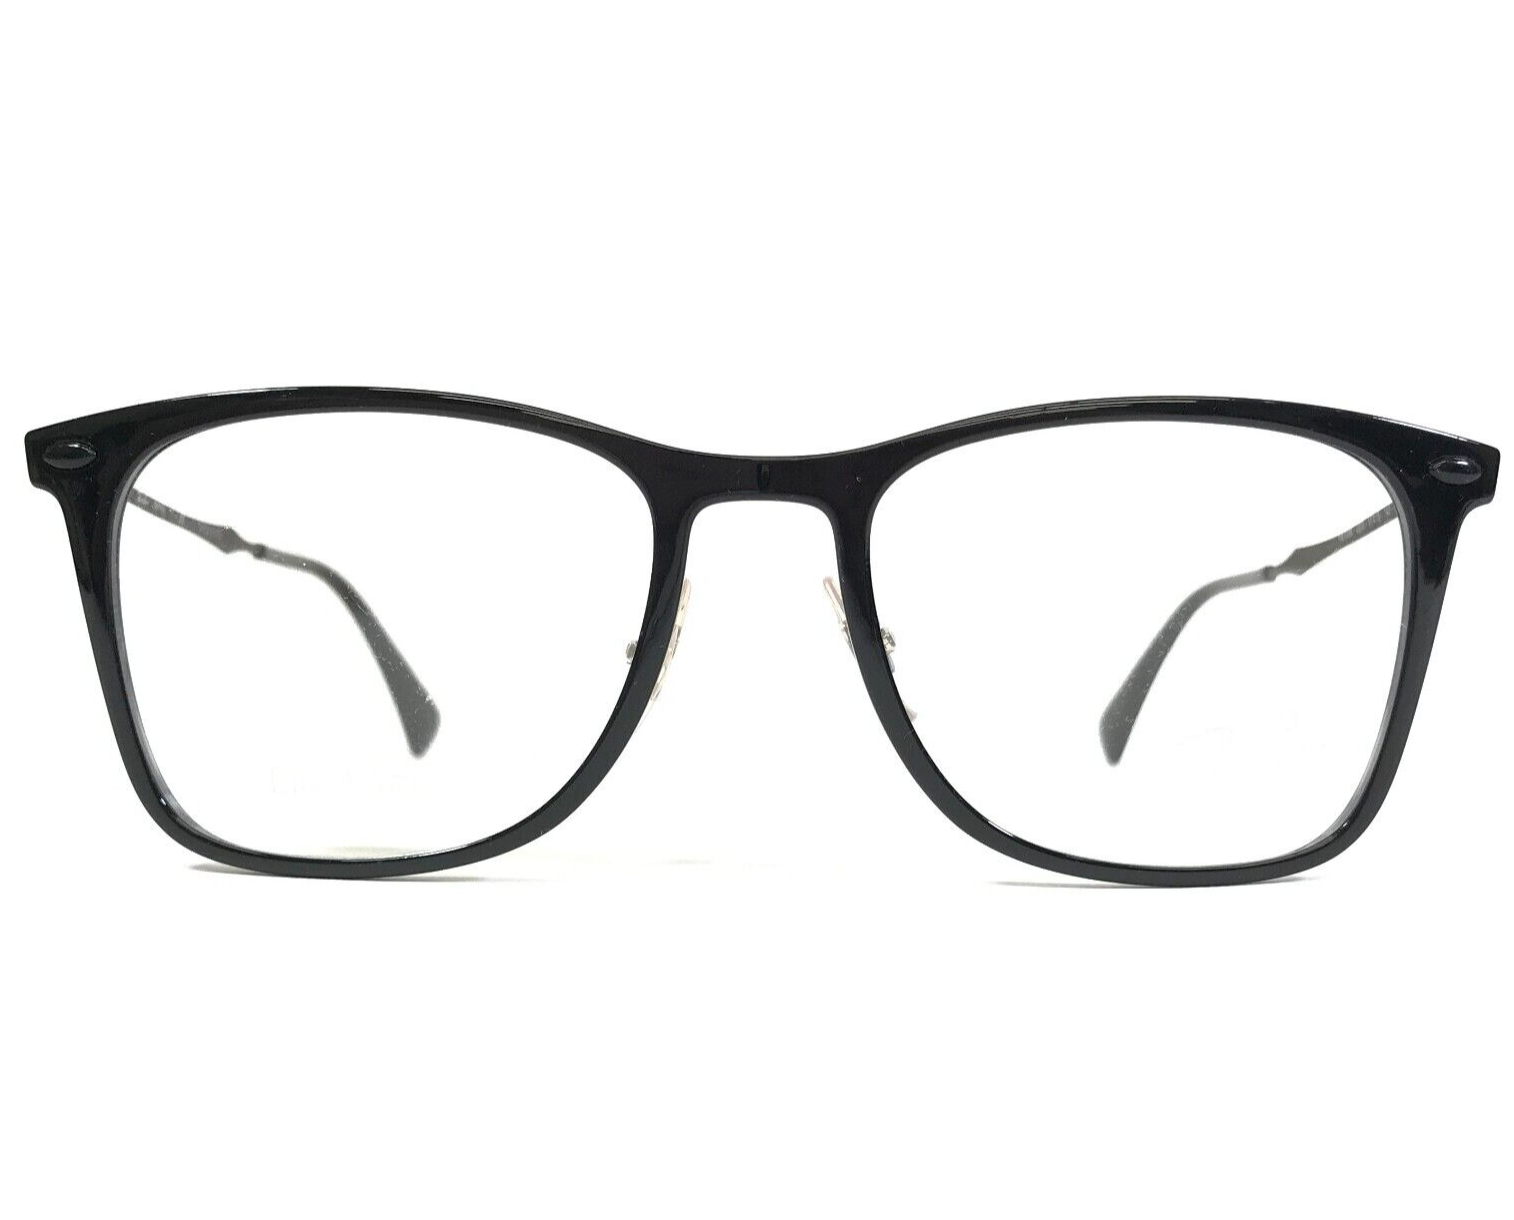 Primary image for Ray-Ban Eyeglasses Frames RB7086 2000 LightRay Black Gray Square 51-18-140